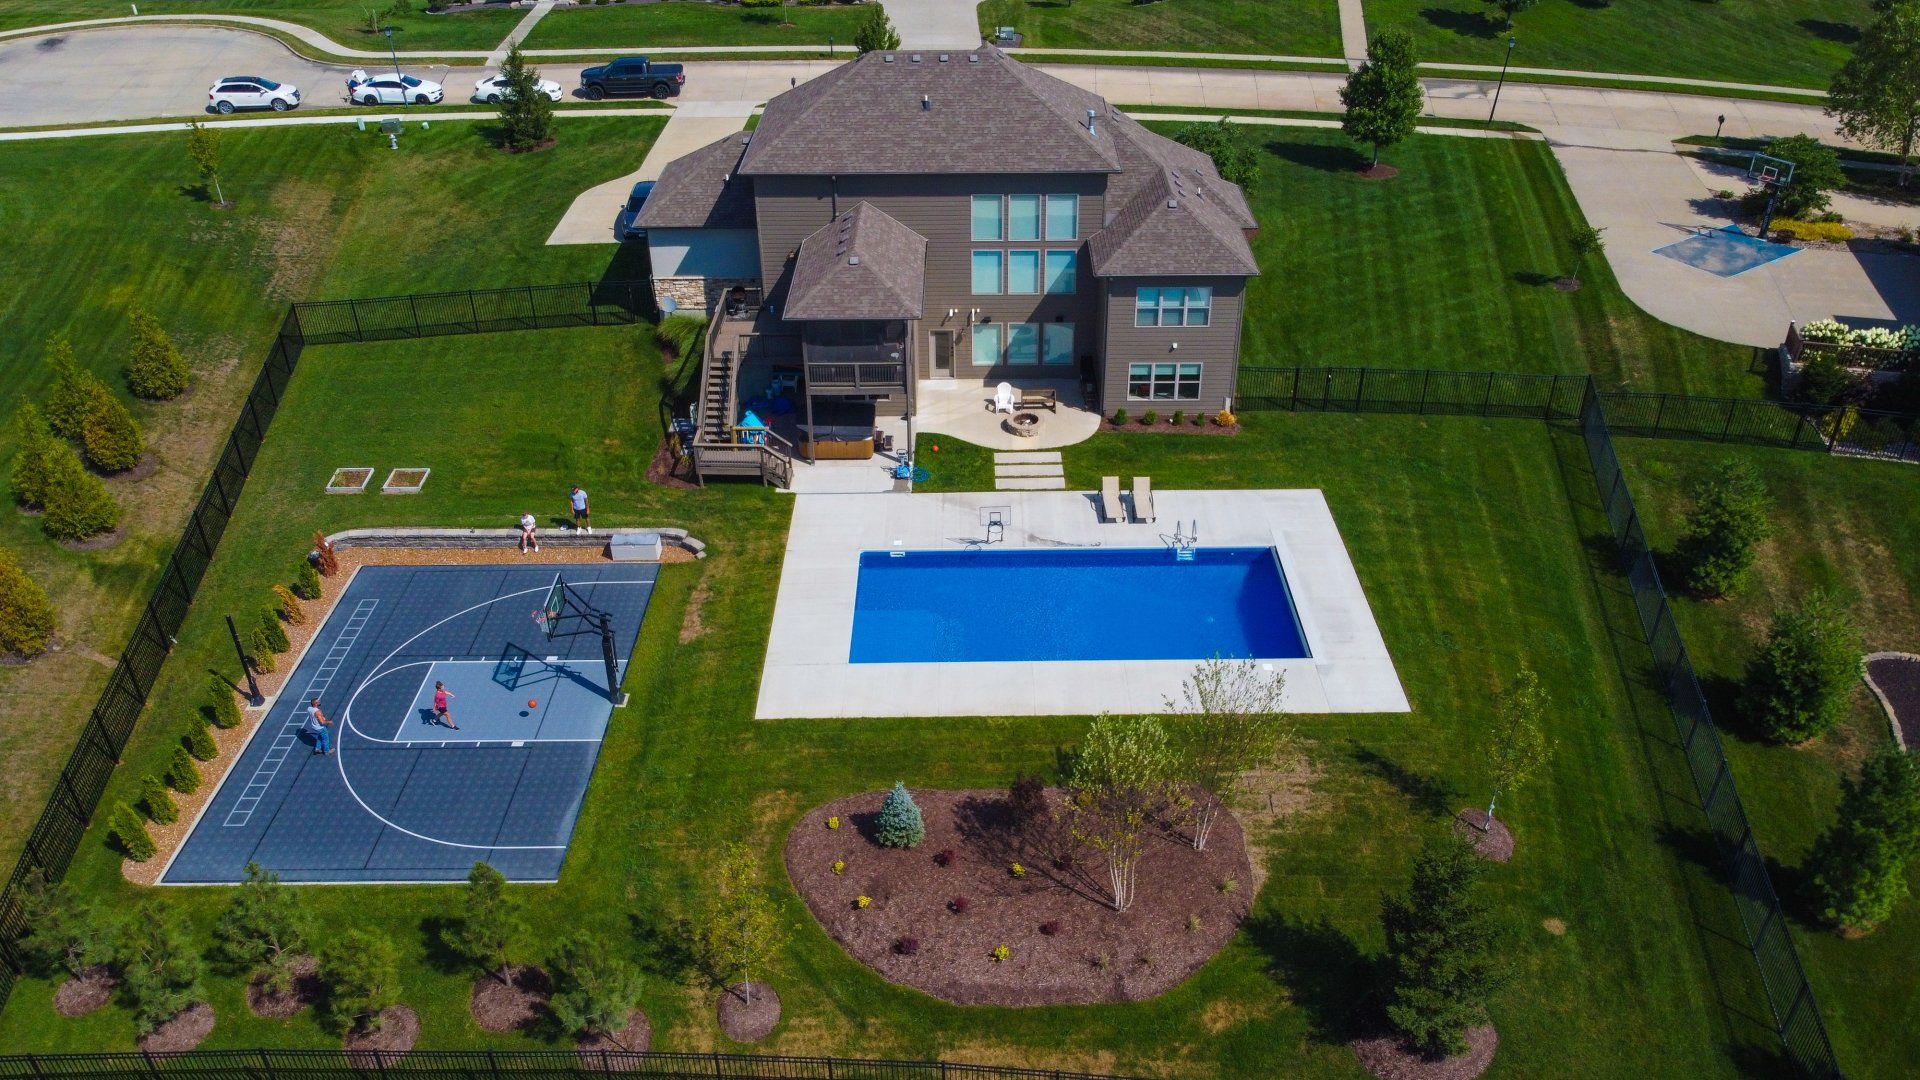 Get a Resort Style Pool With Peavler Construction’s Vinyl Liner Pool in Columbia, Missouri.